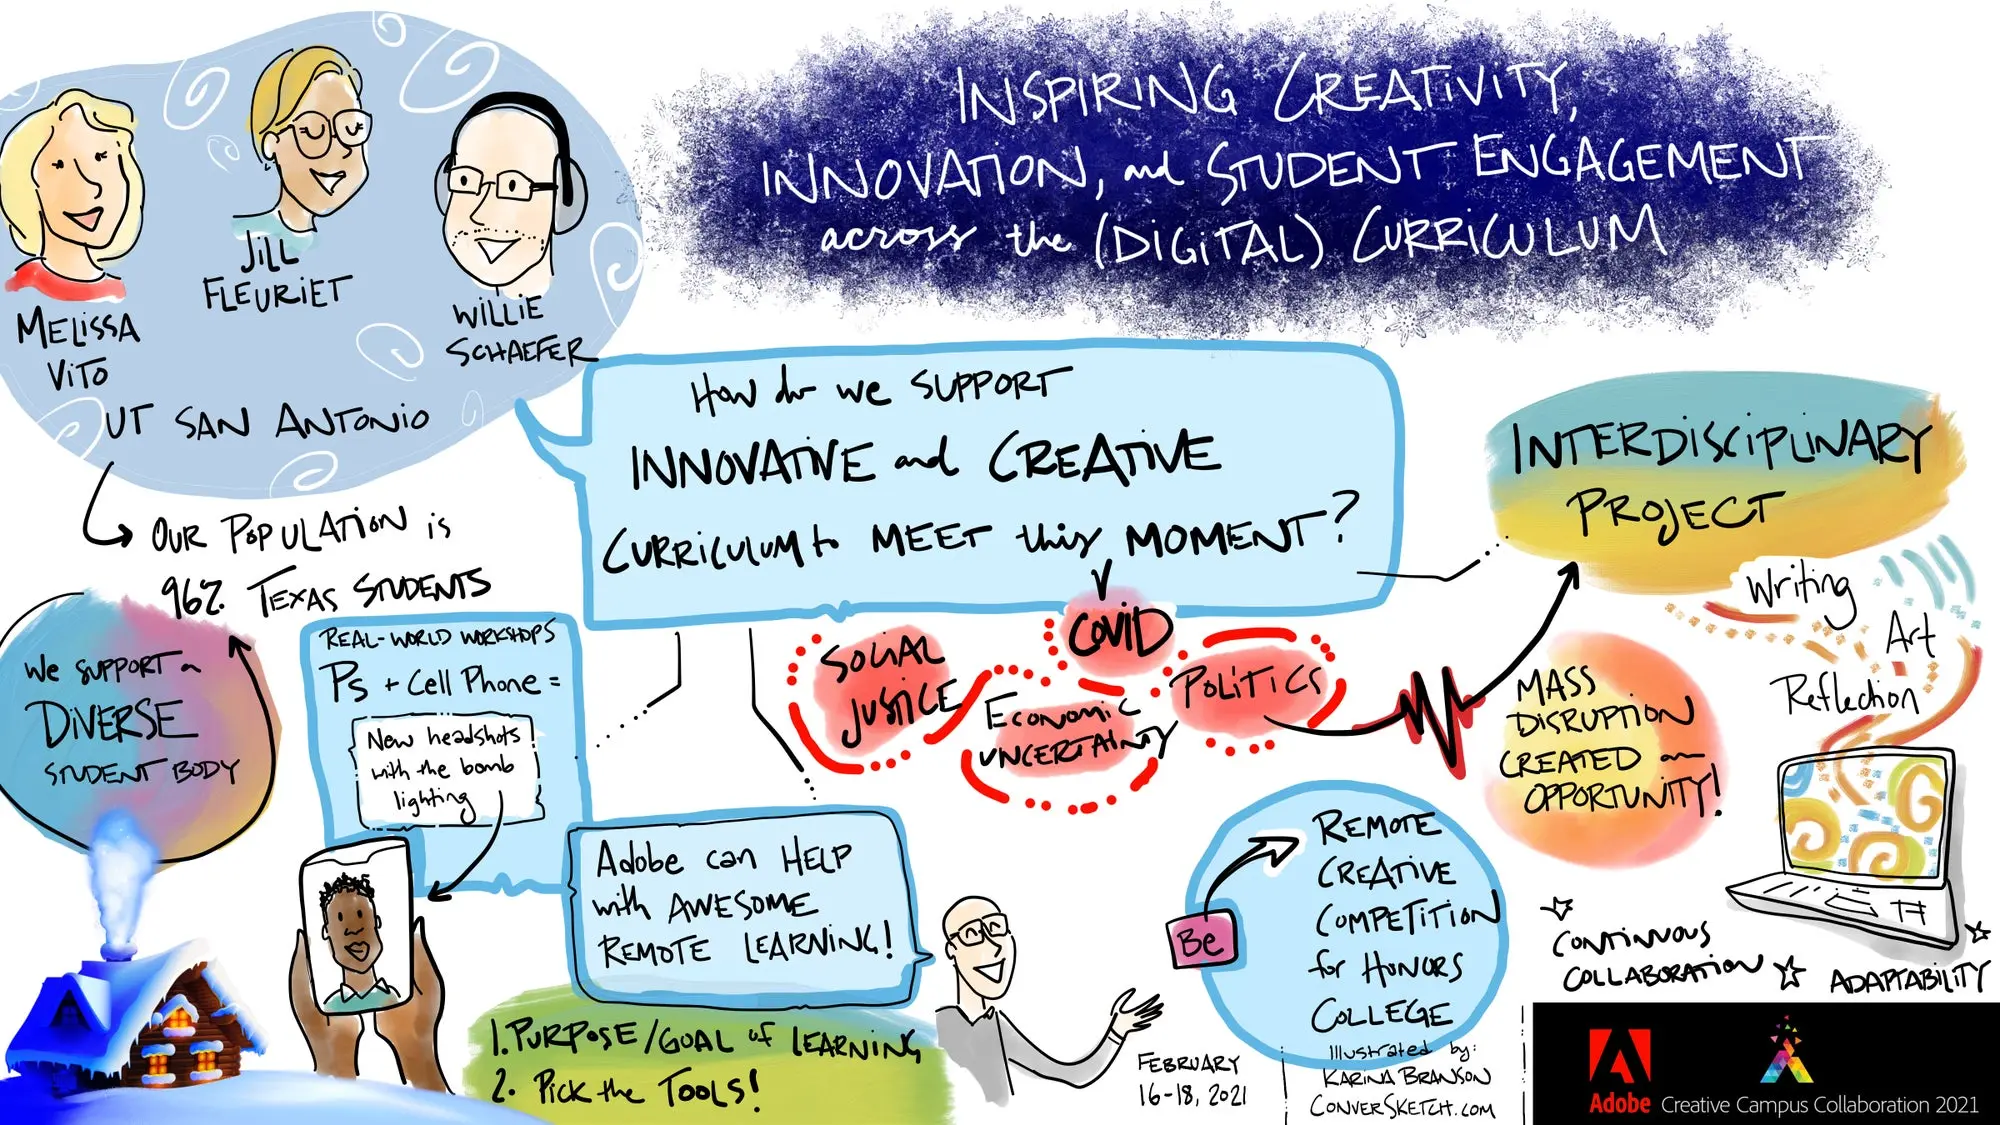 Illustration that says Inspiring creativity innovation and student engagment across the digital curriculum. 